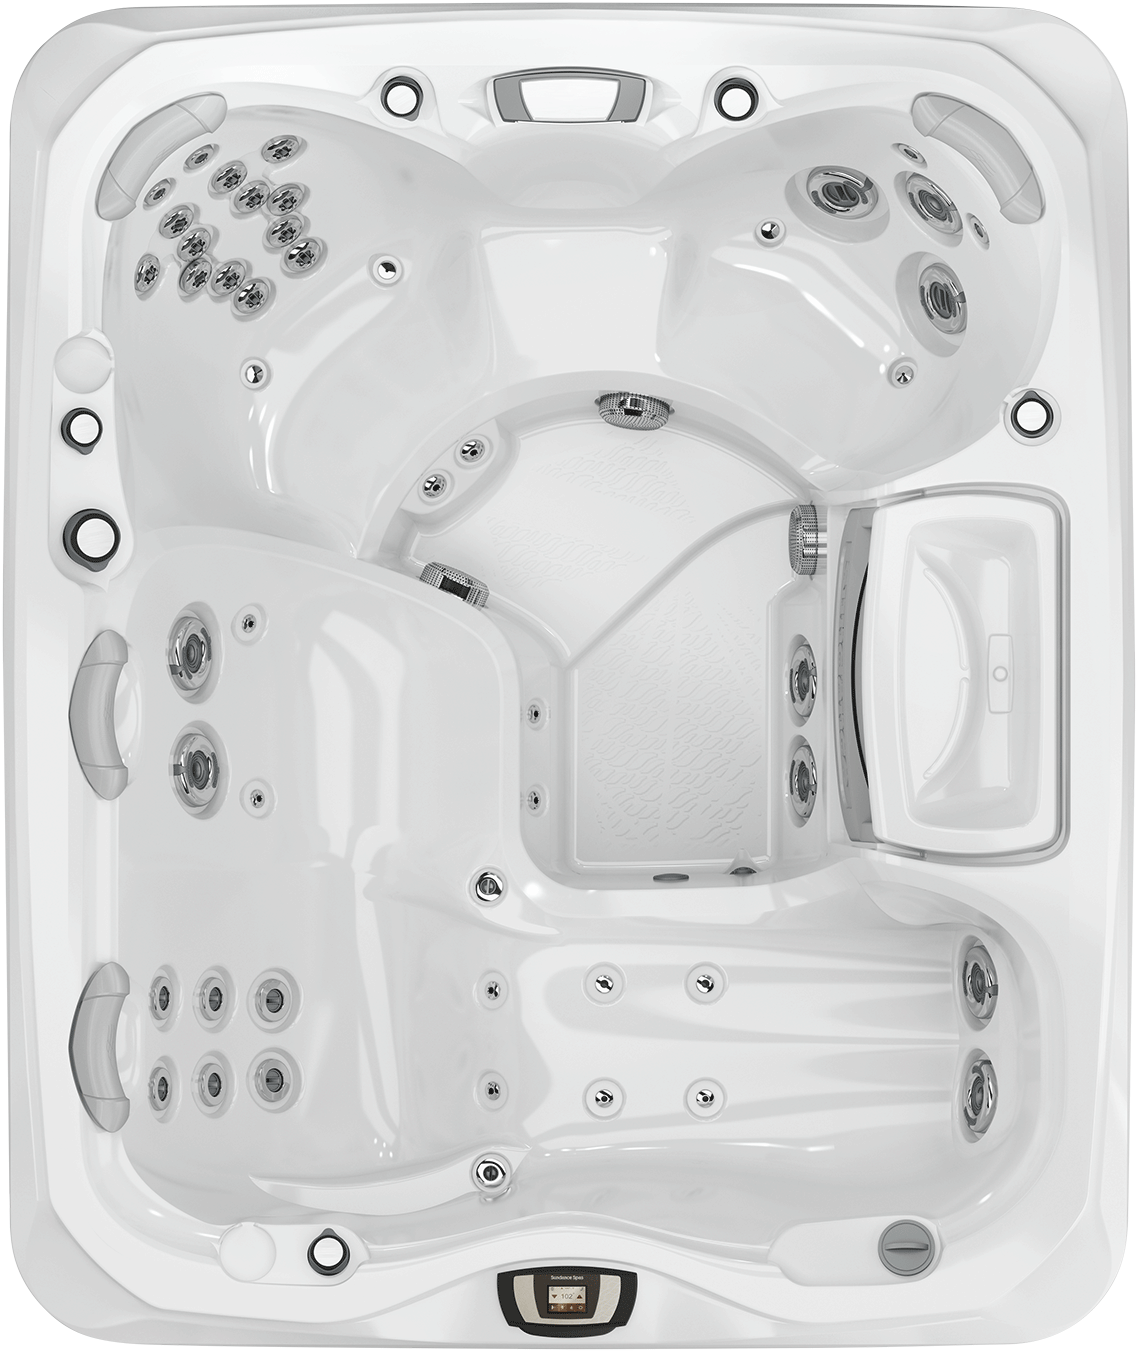 A White Hot Tub With Many Holes